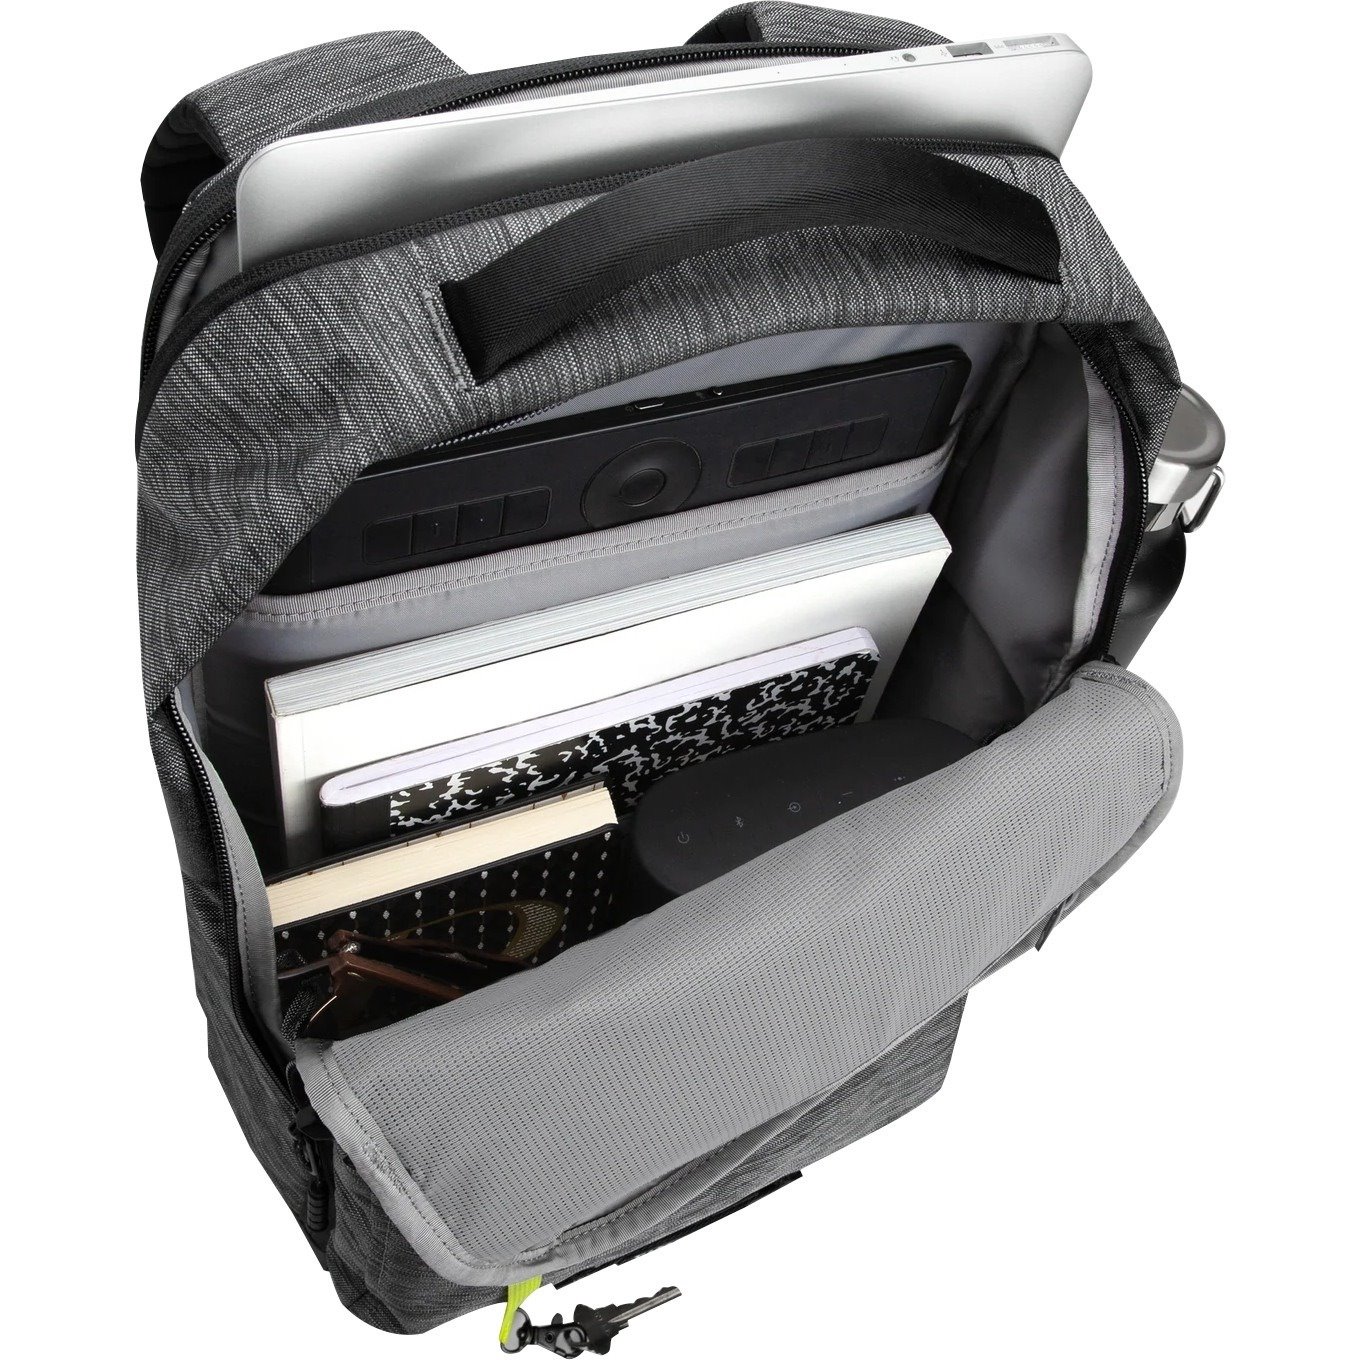 Timbuk2 Division Carrying Case (Backpack) for 15" Notebook - Eco Static